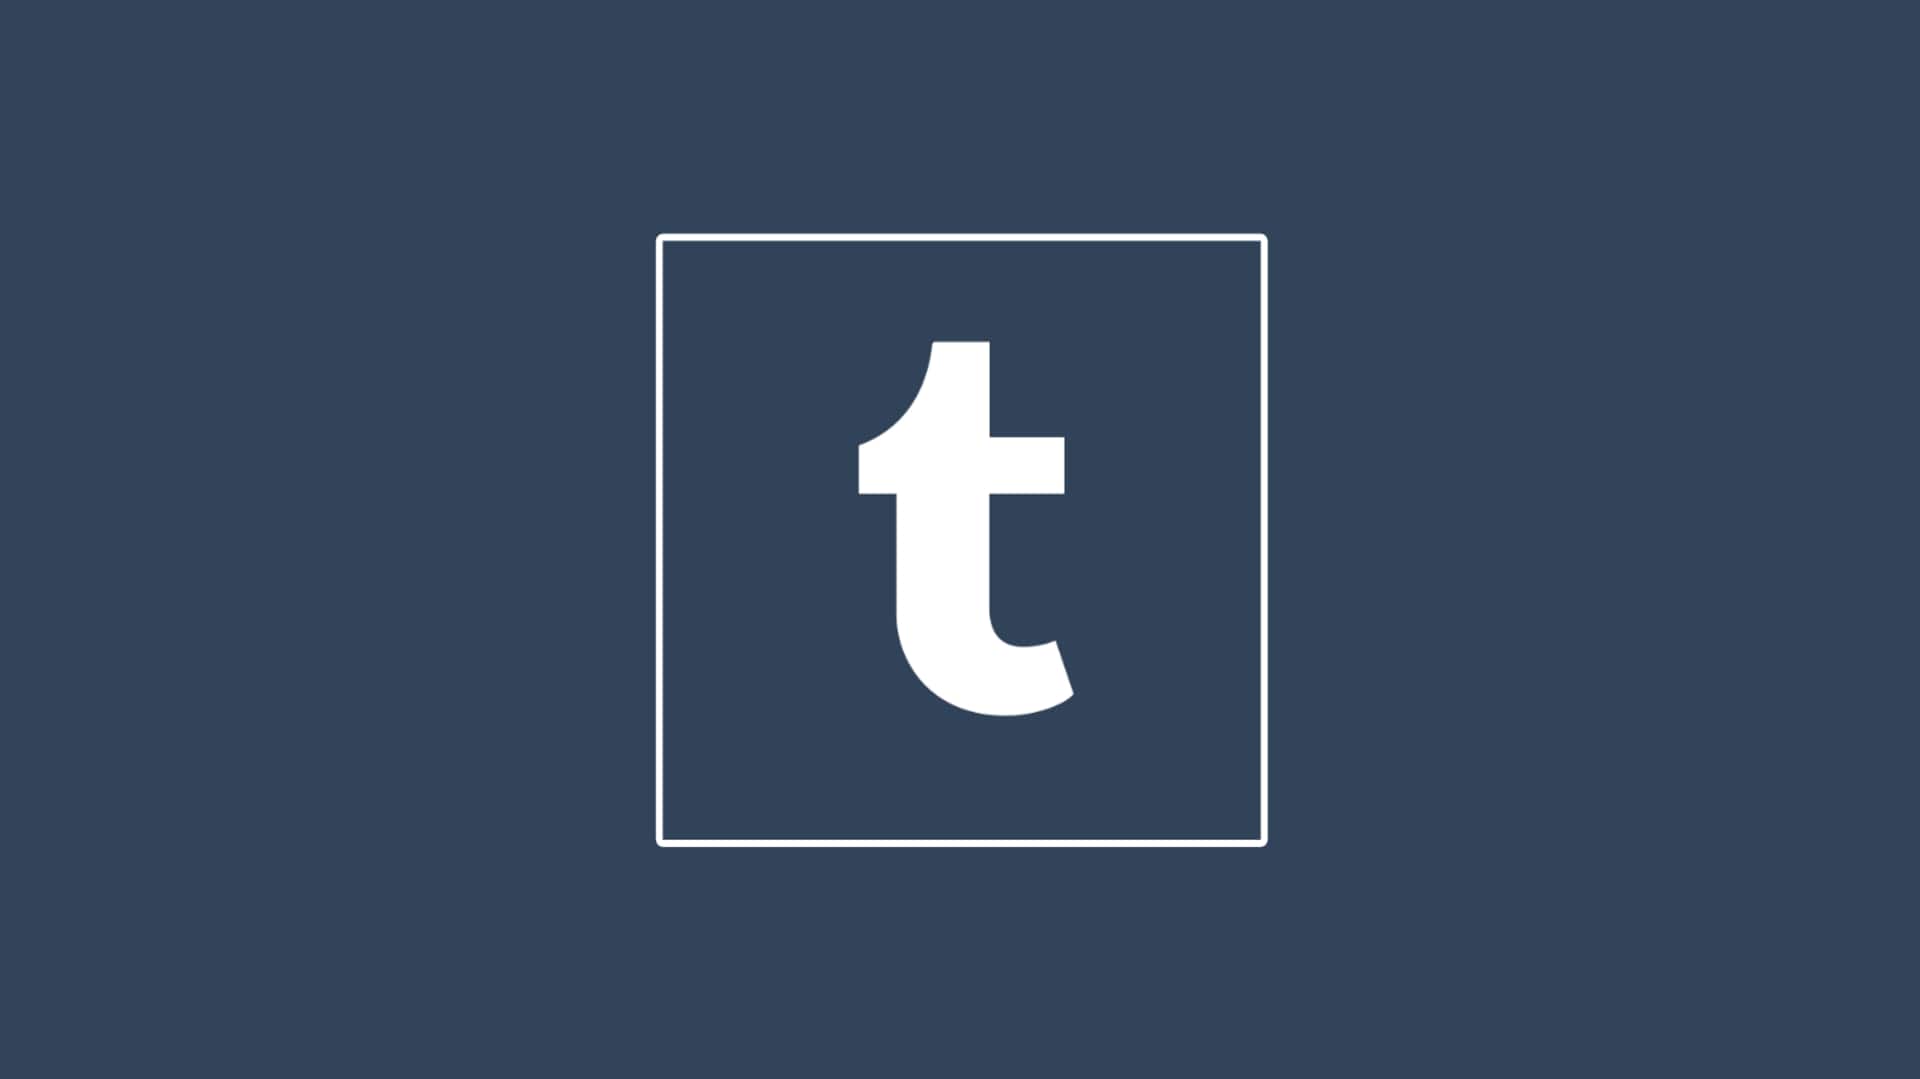 Here's why Tumblr is excessively downsizing staff